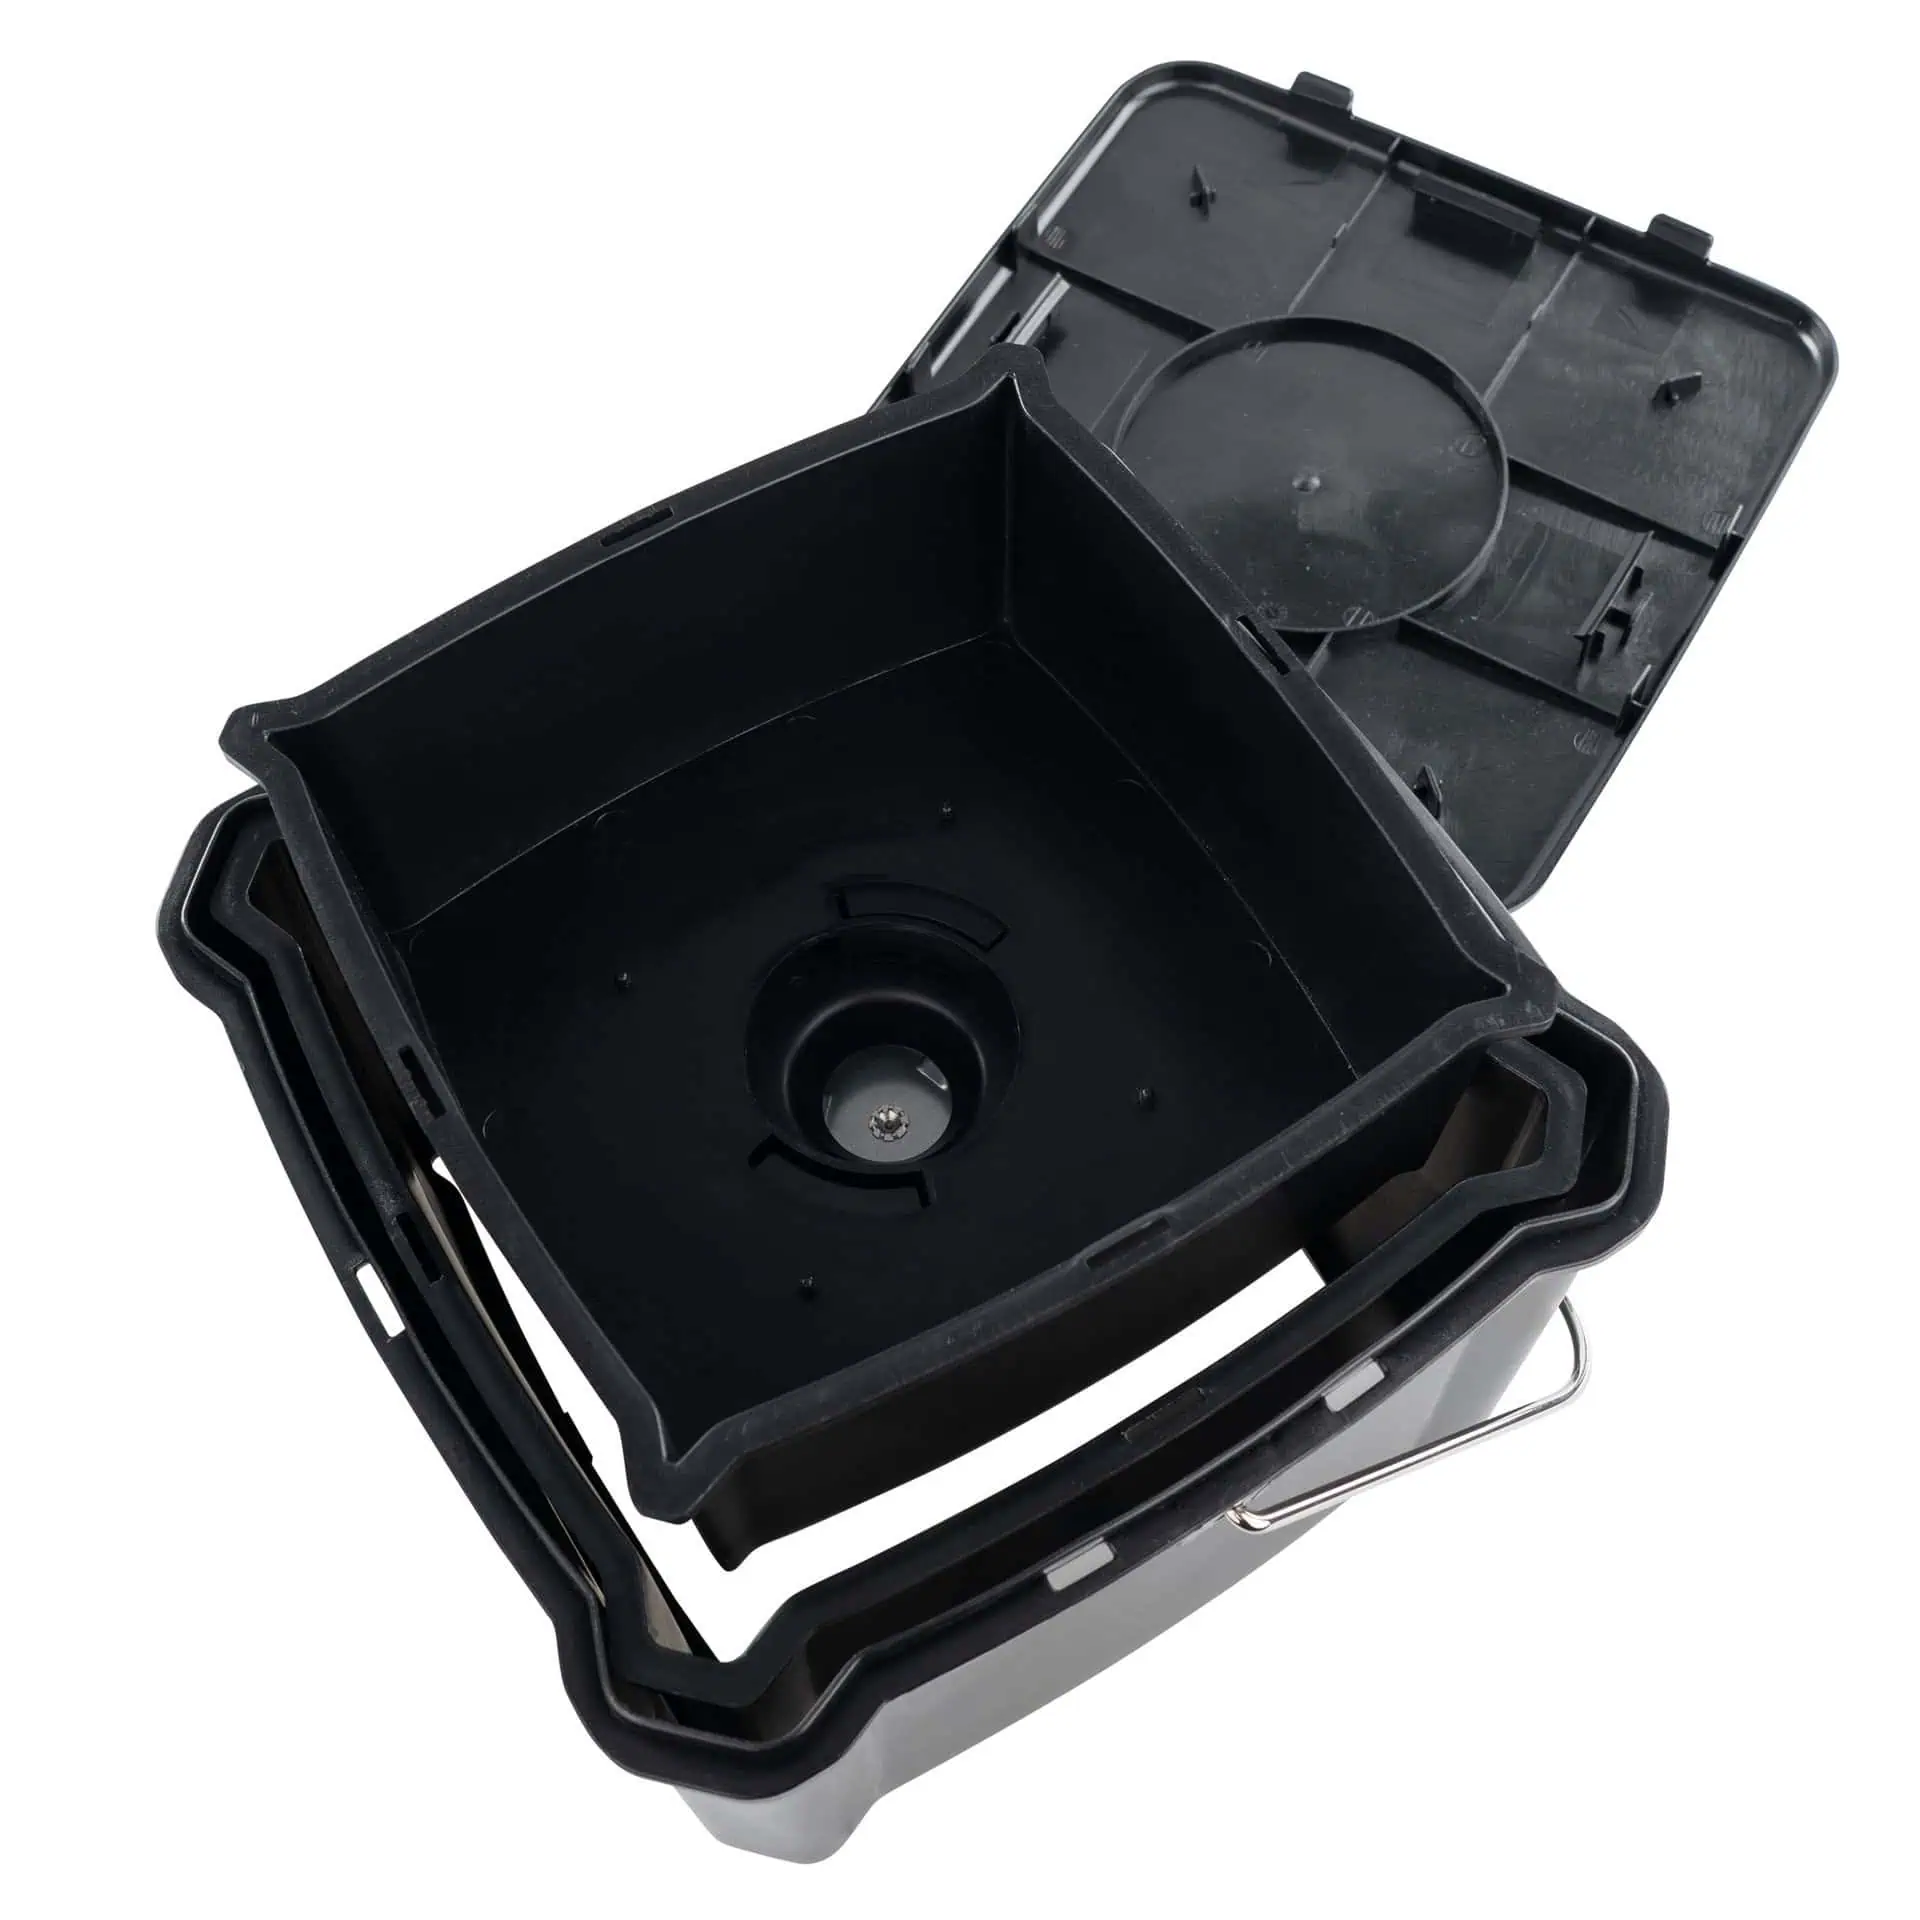 Food spreader compact set with container